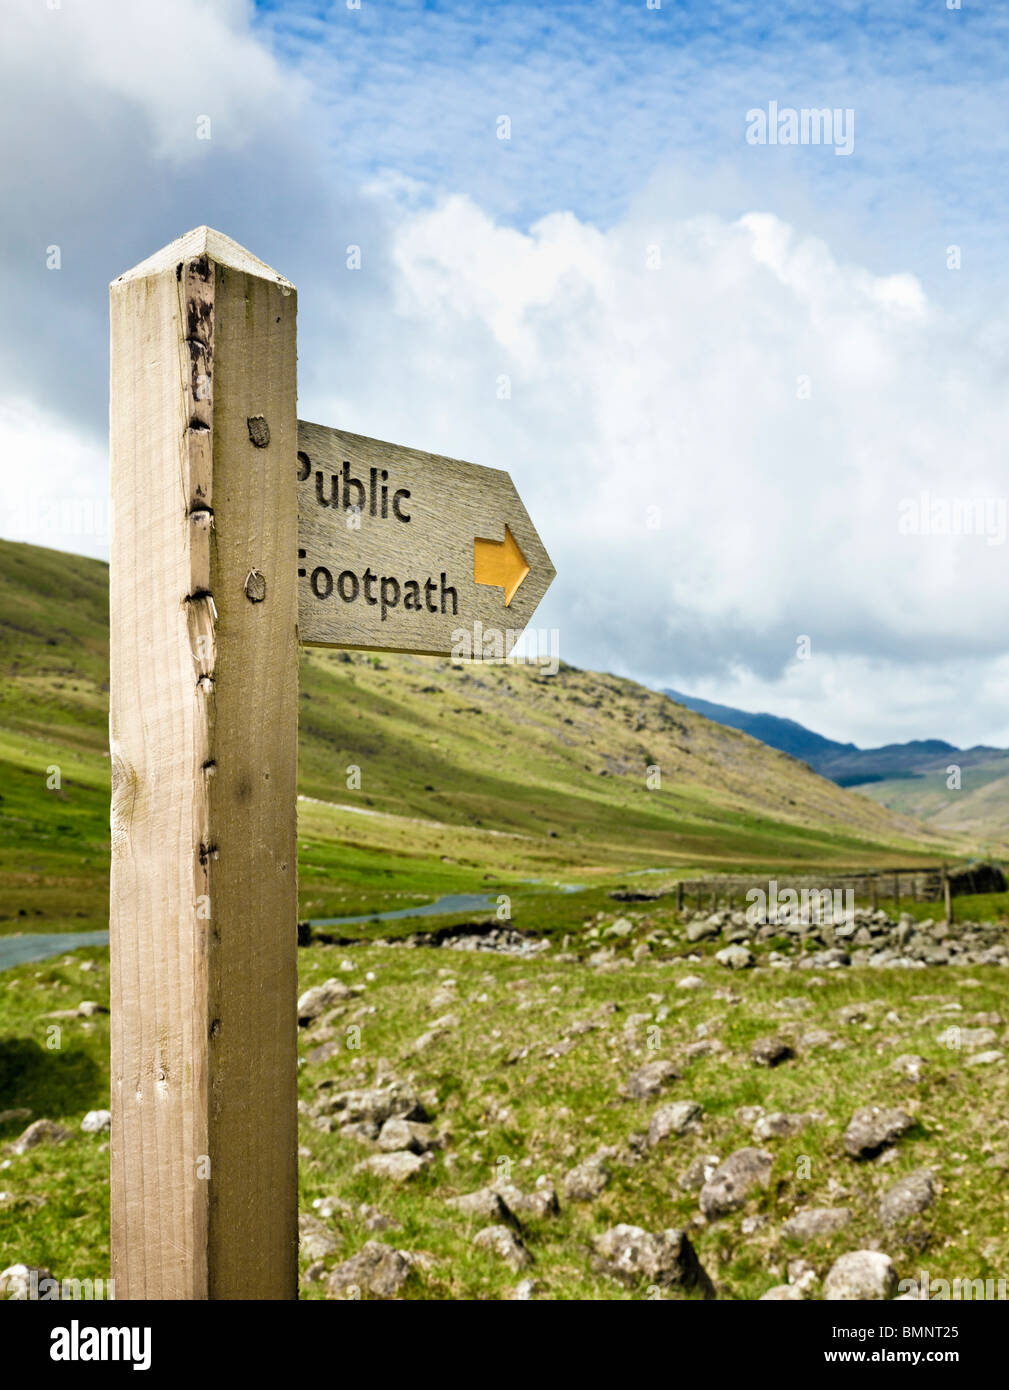 Public footpath wooden signpost in a remote valley in The Lake District England UK Stock Photo